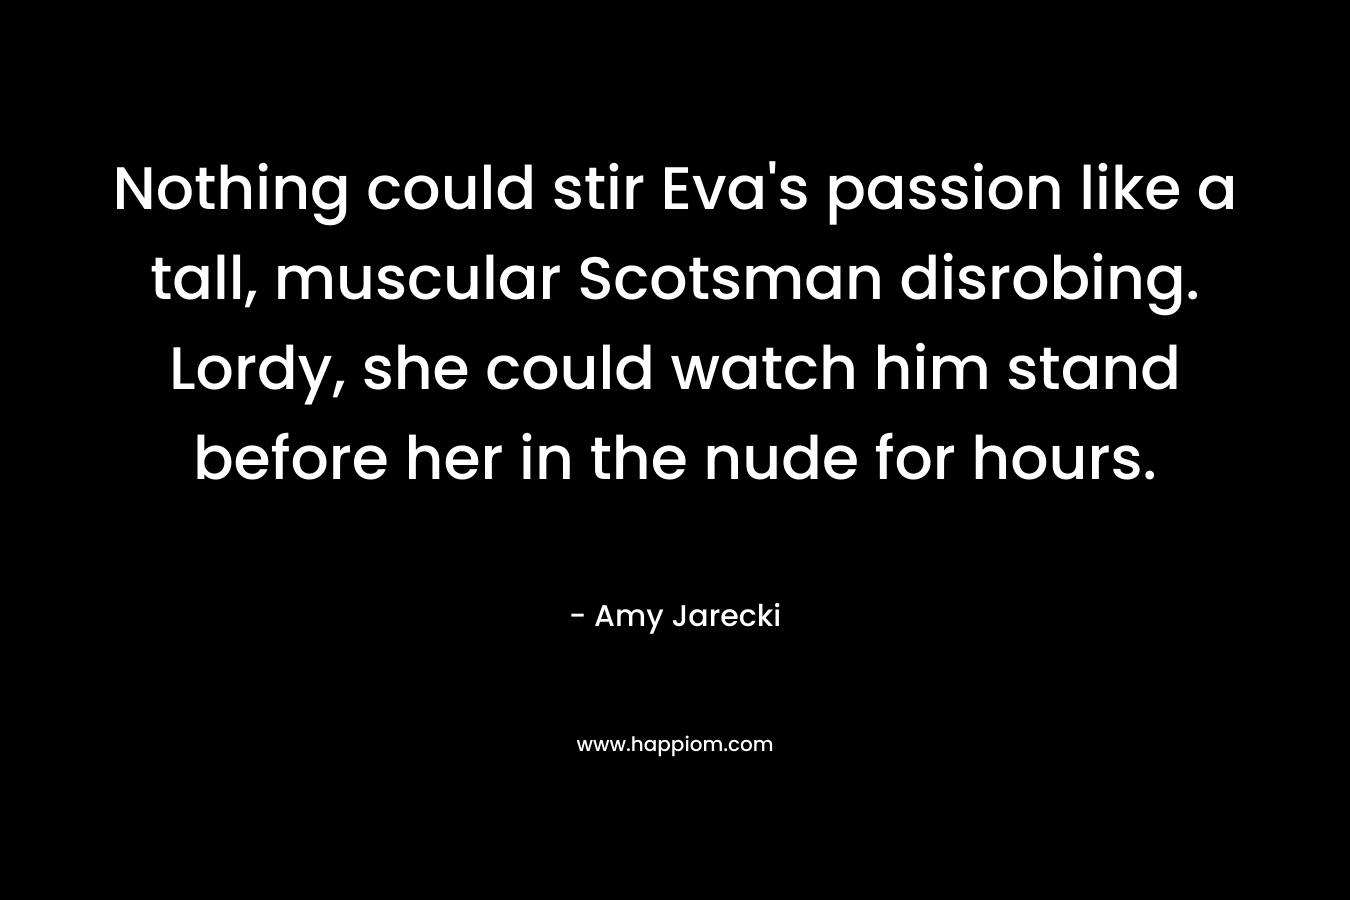 Nothing could stir Eva’s passion like a tall, muscular Scotsman disrobing. Lordy, she could watch him stand before her in the nude for hours. – Amy Jarecki